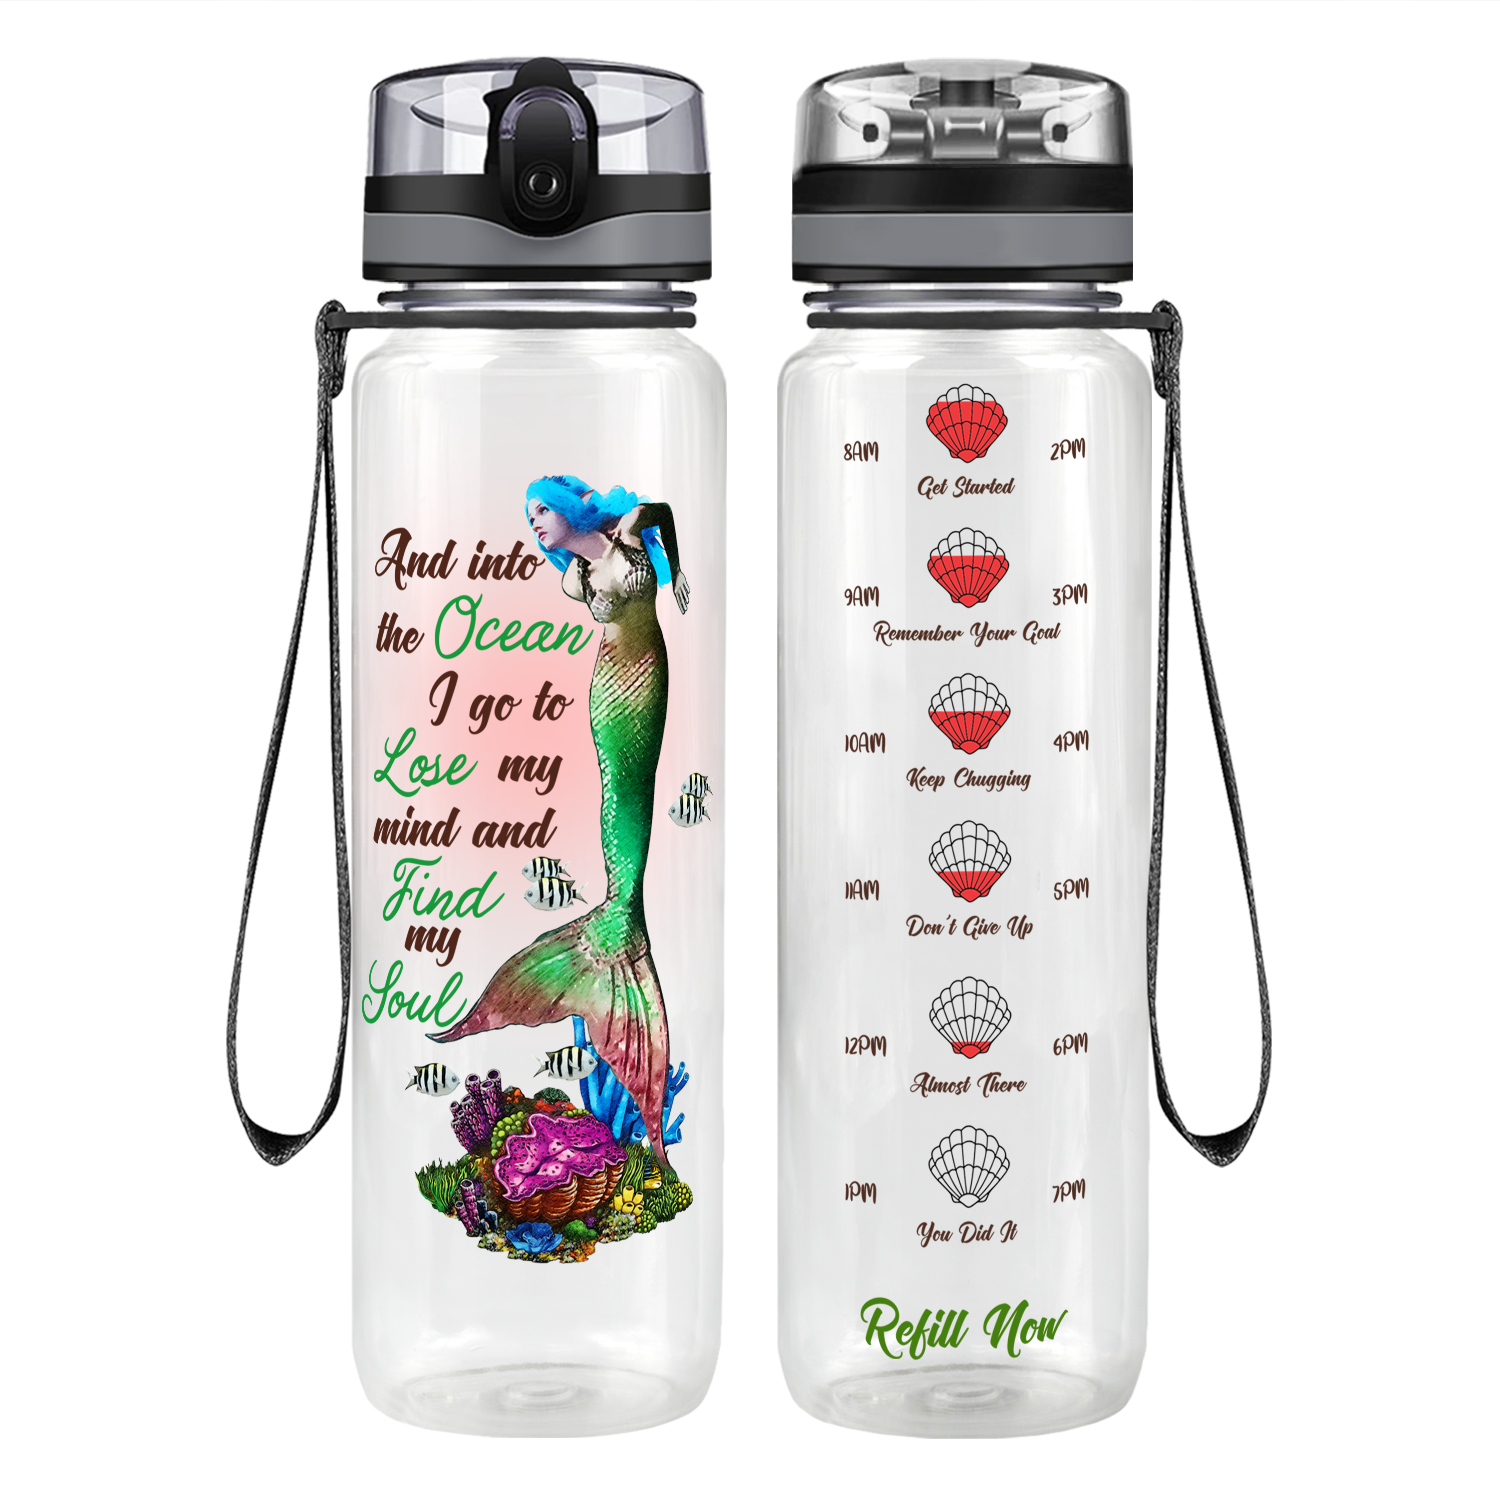 Lose my Mind Find my Soul Motivational Tracking Water Bottle